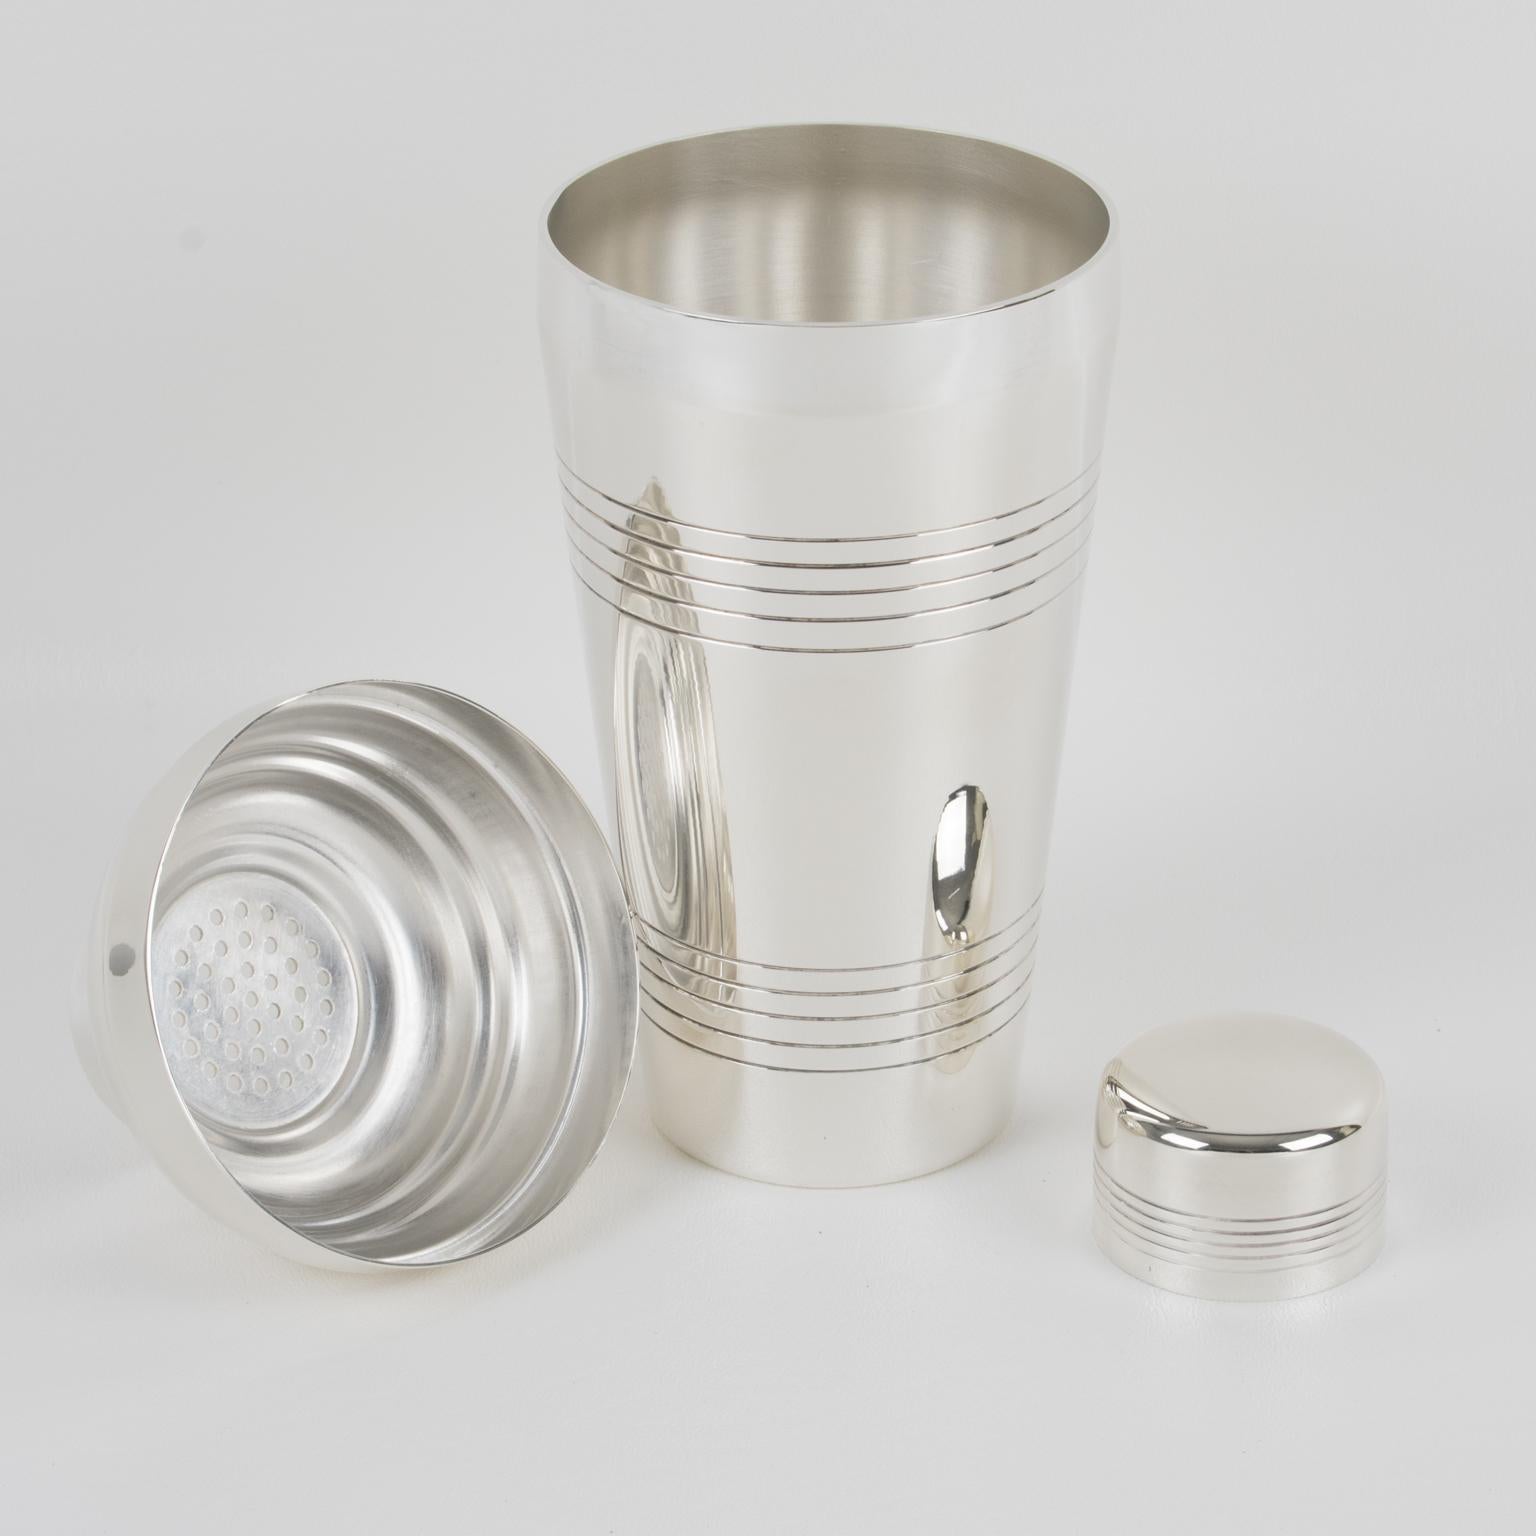 French Art Deco Silver Plate Cocktail Shaker by Gelb France